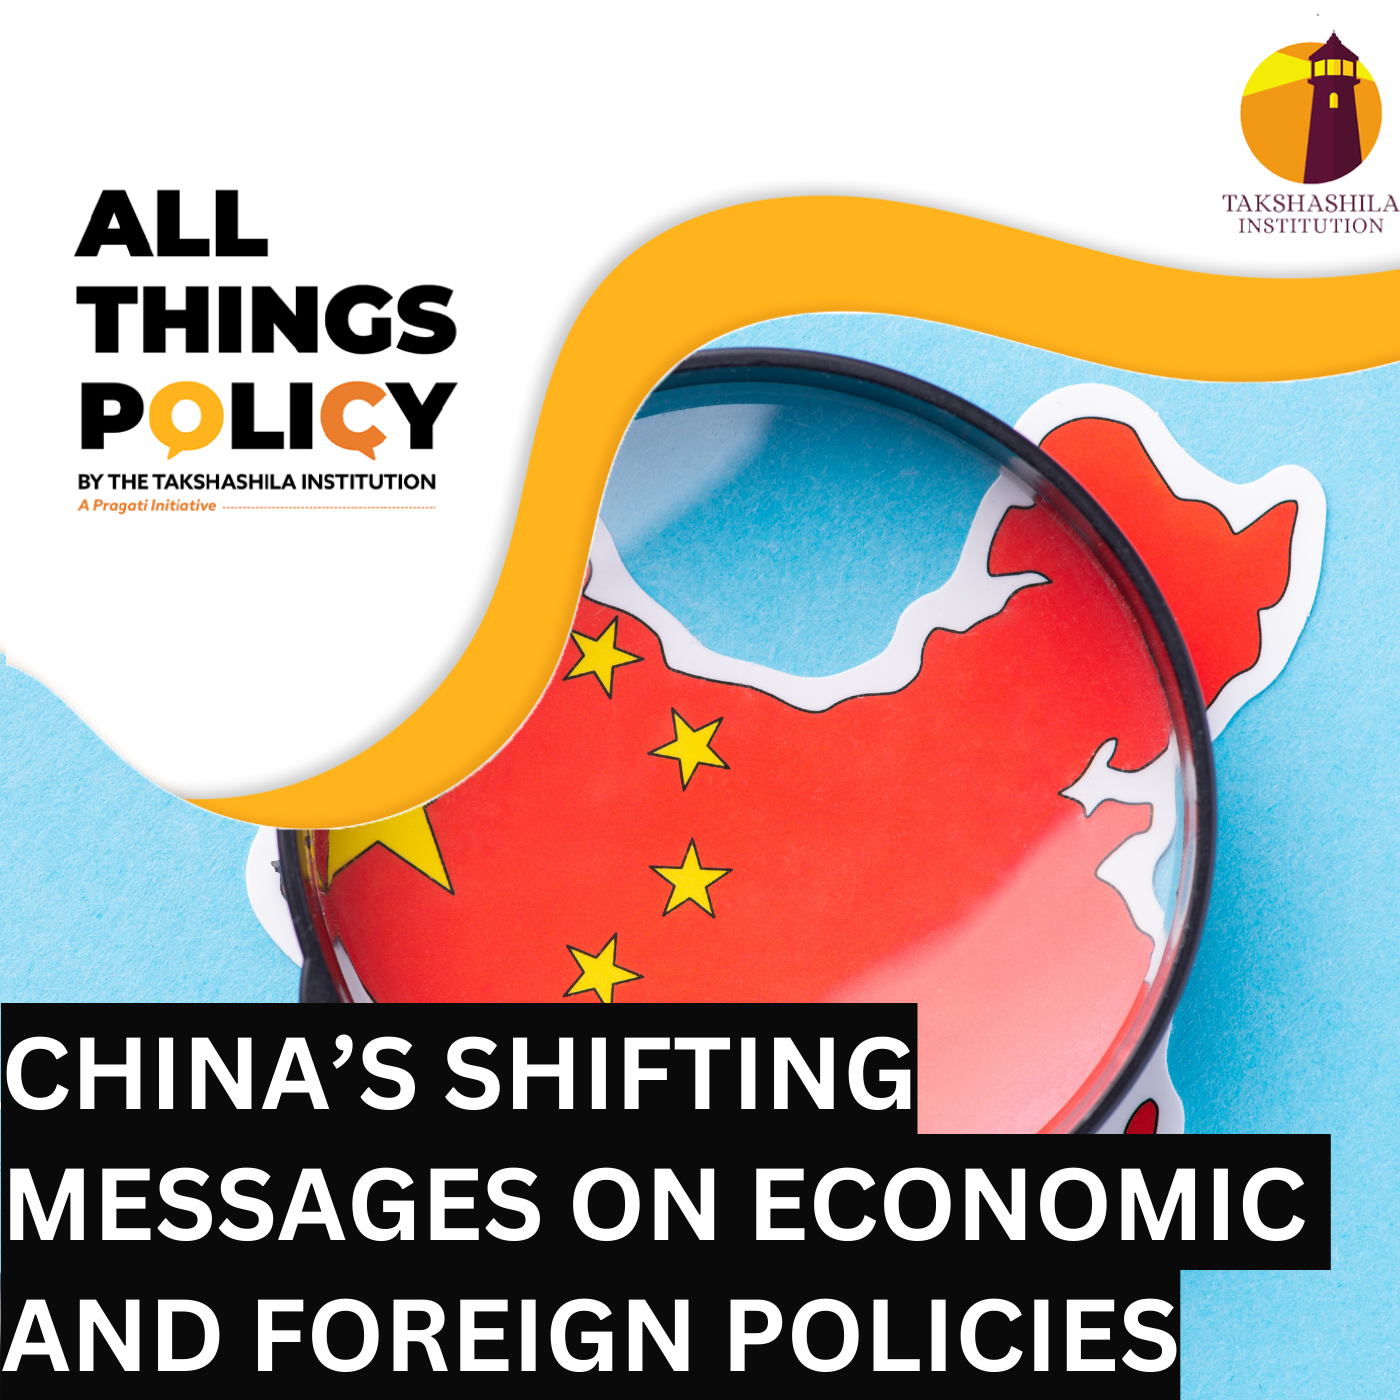 China’s Shifting Messages on Economic & Foreign Policies